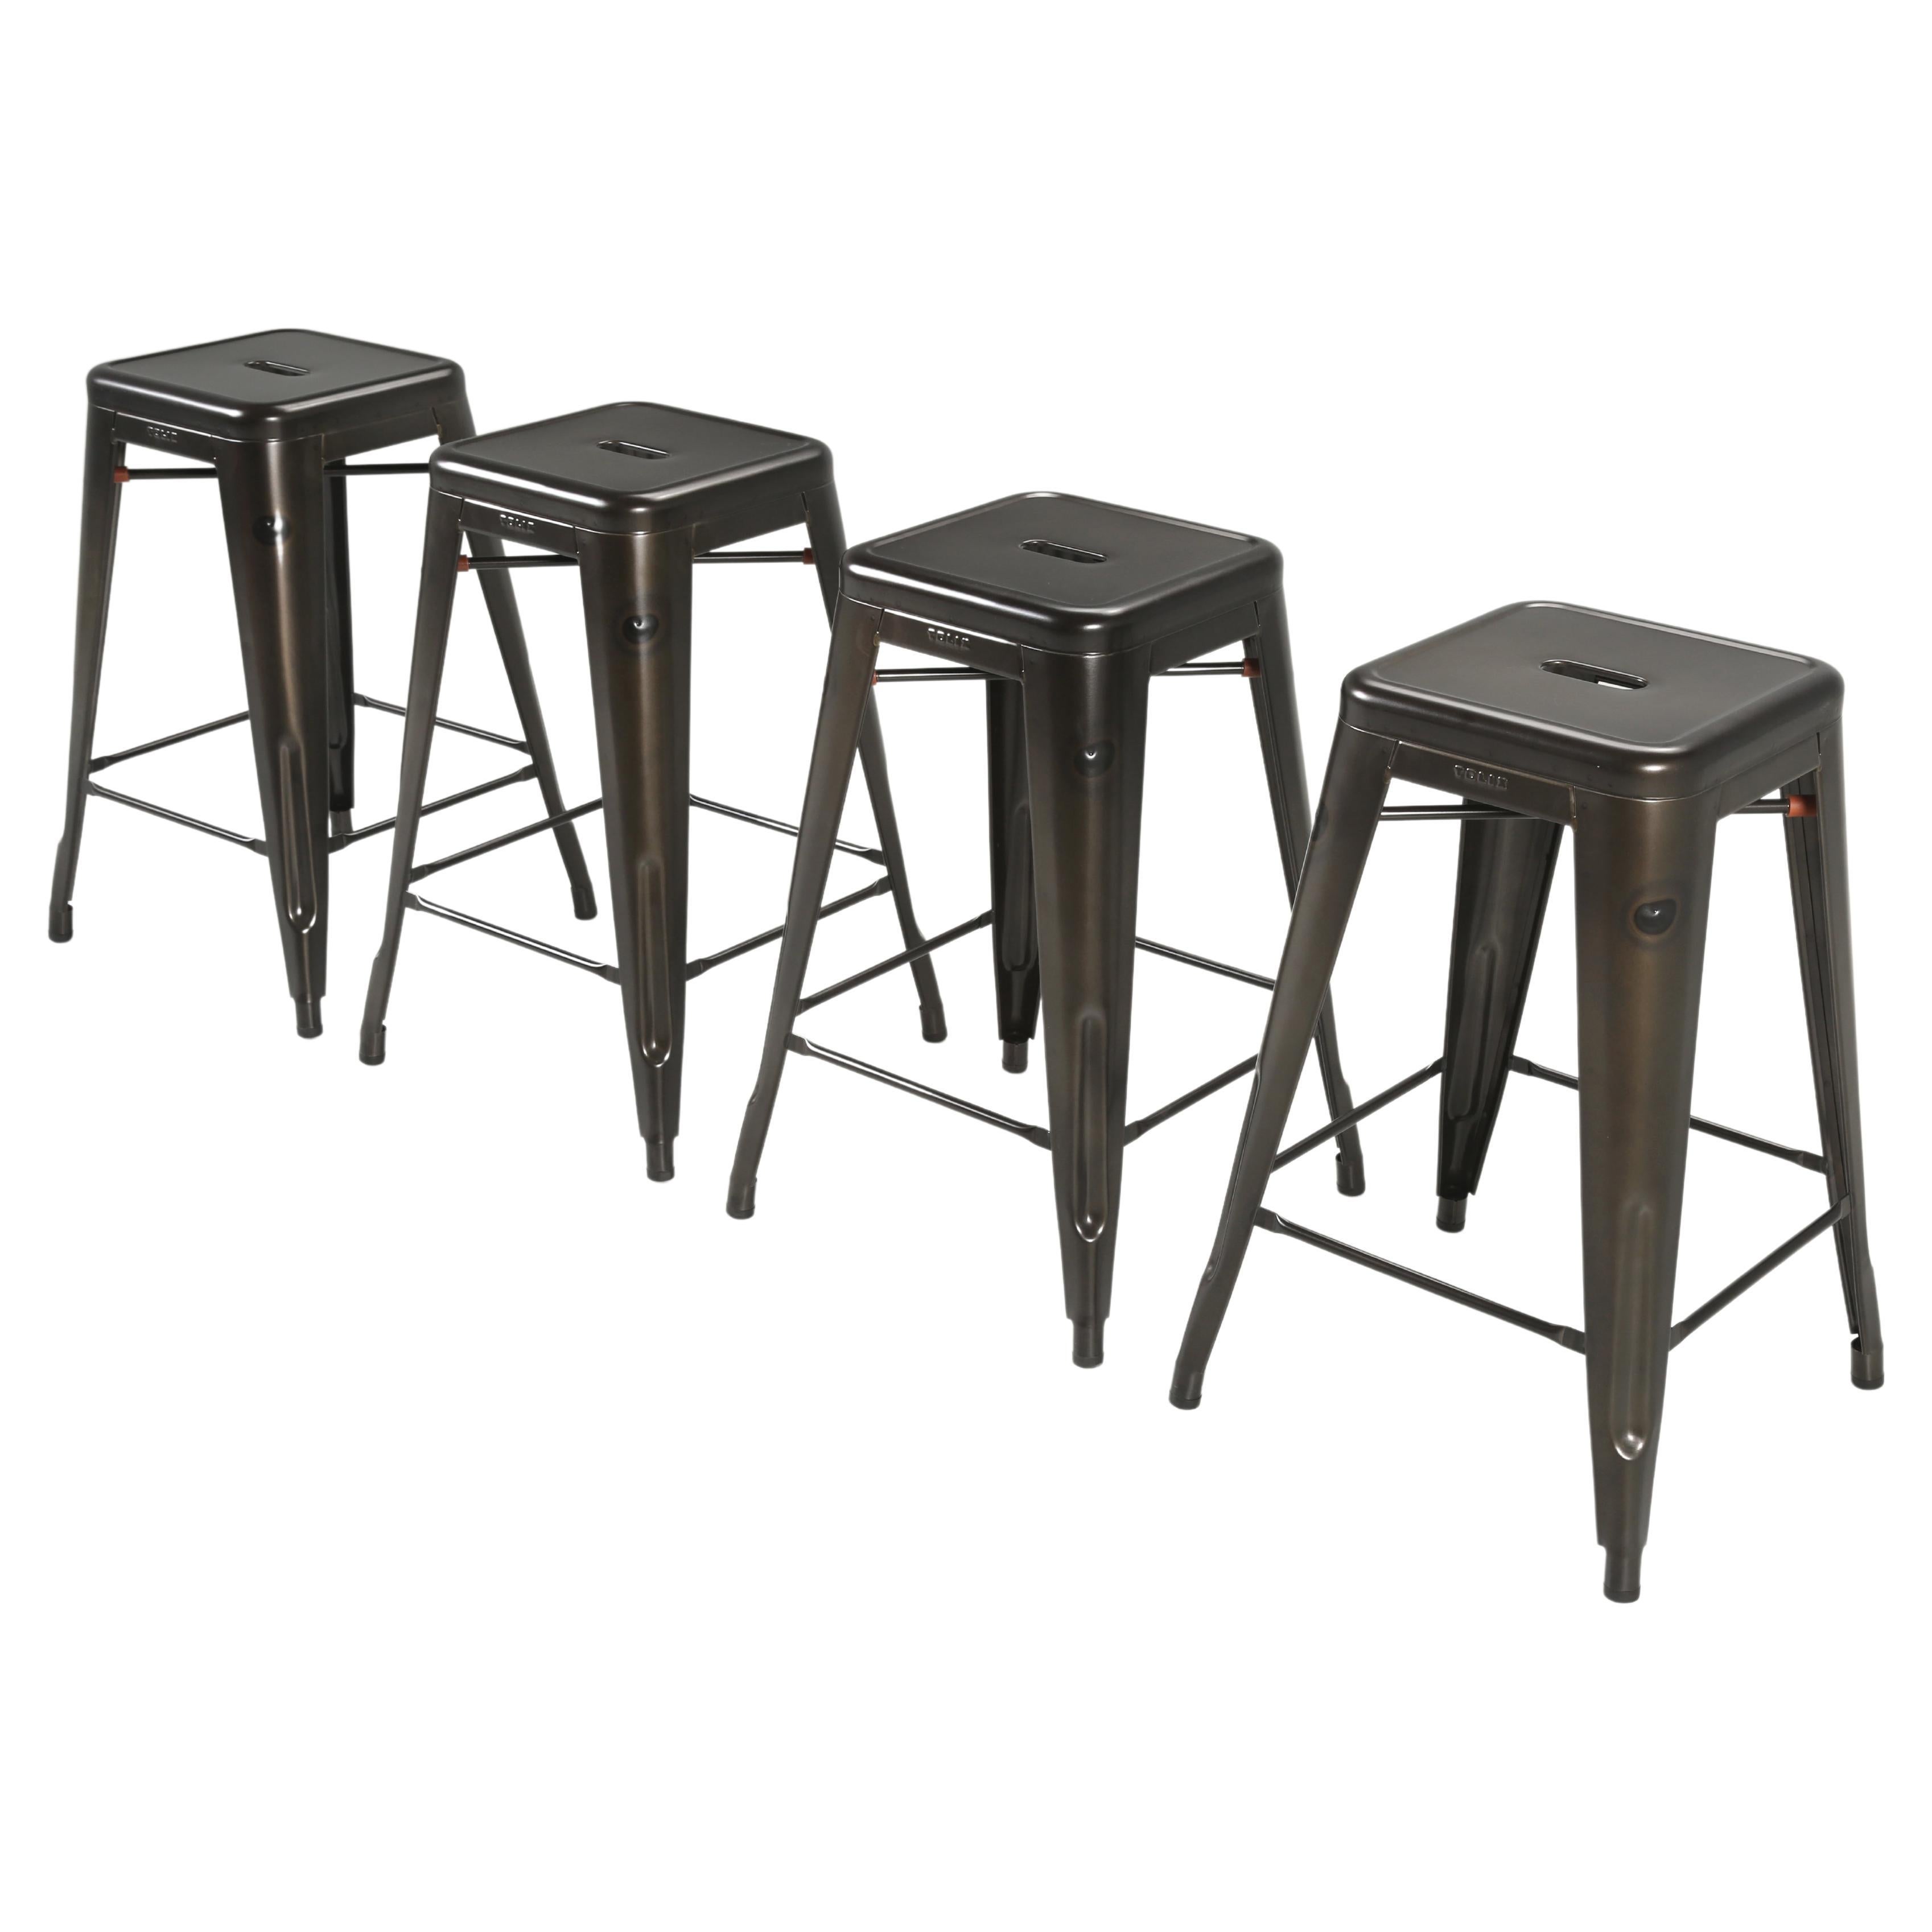 Genuine French Tolix Stacking Stools Set of (10) in Charcoal Grey